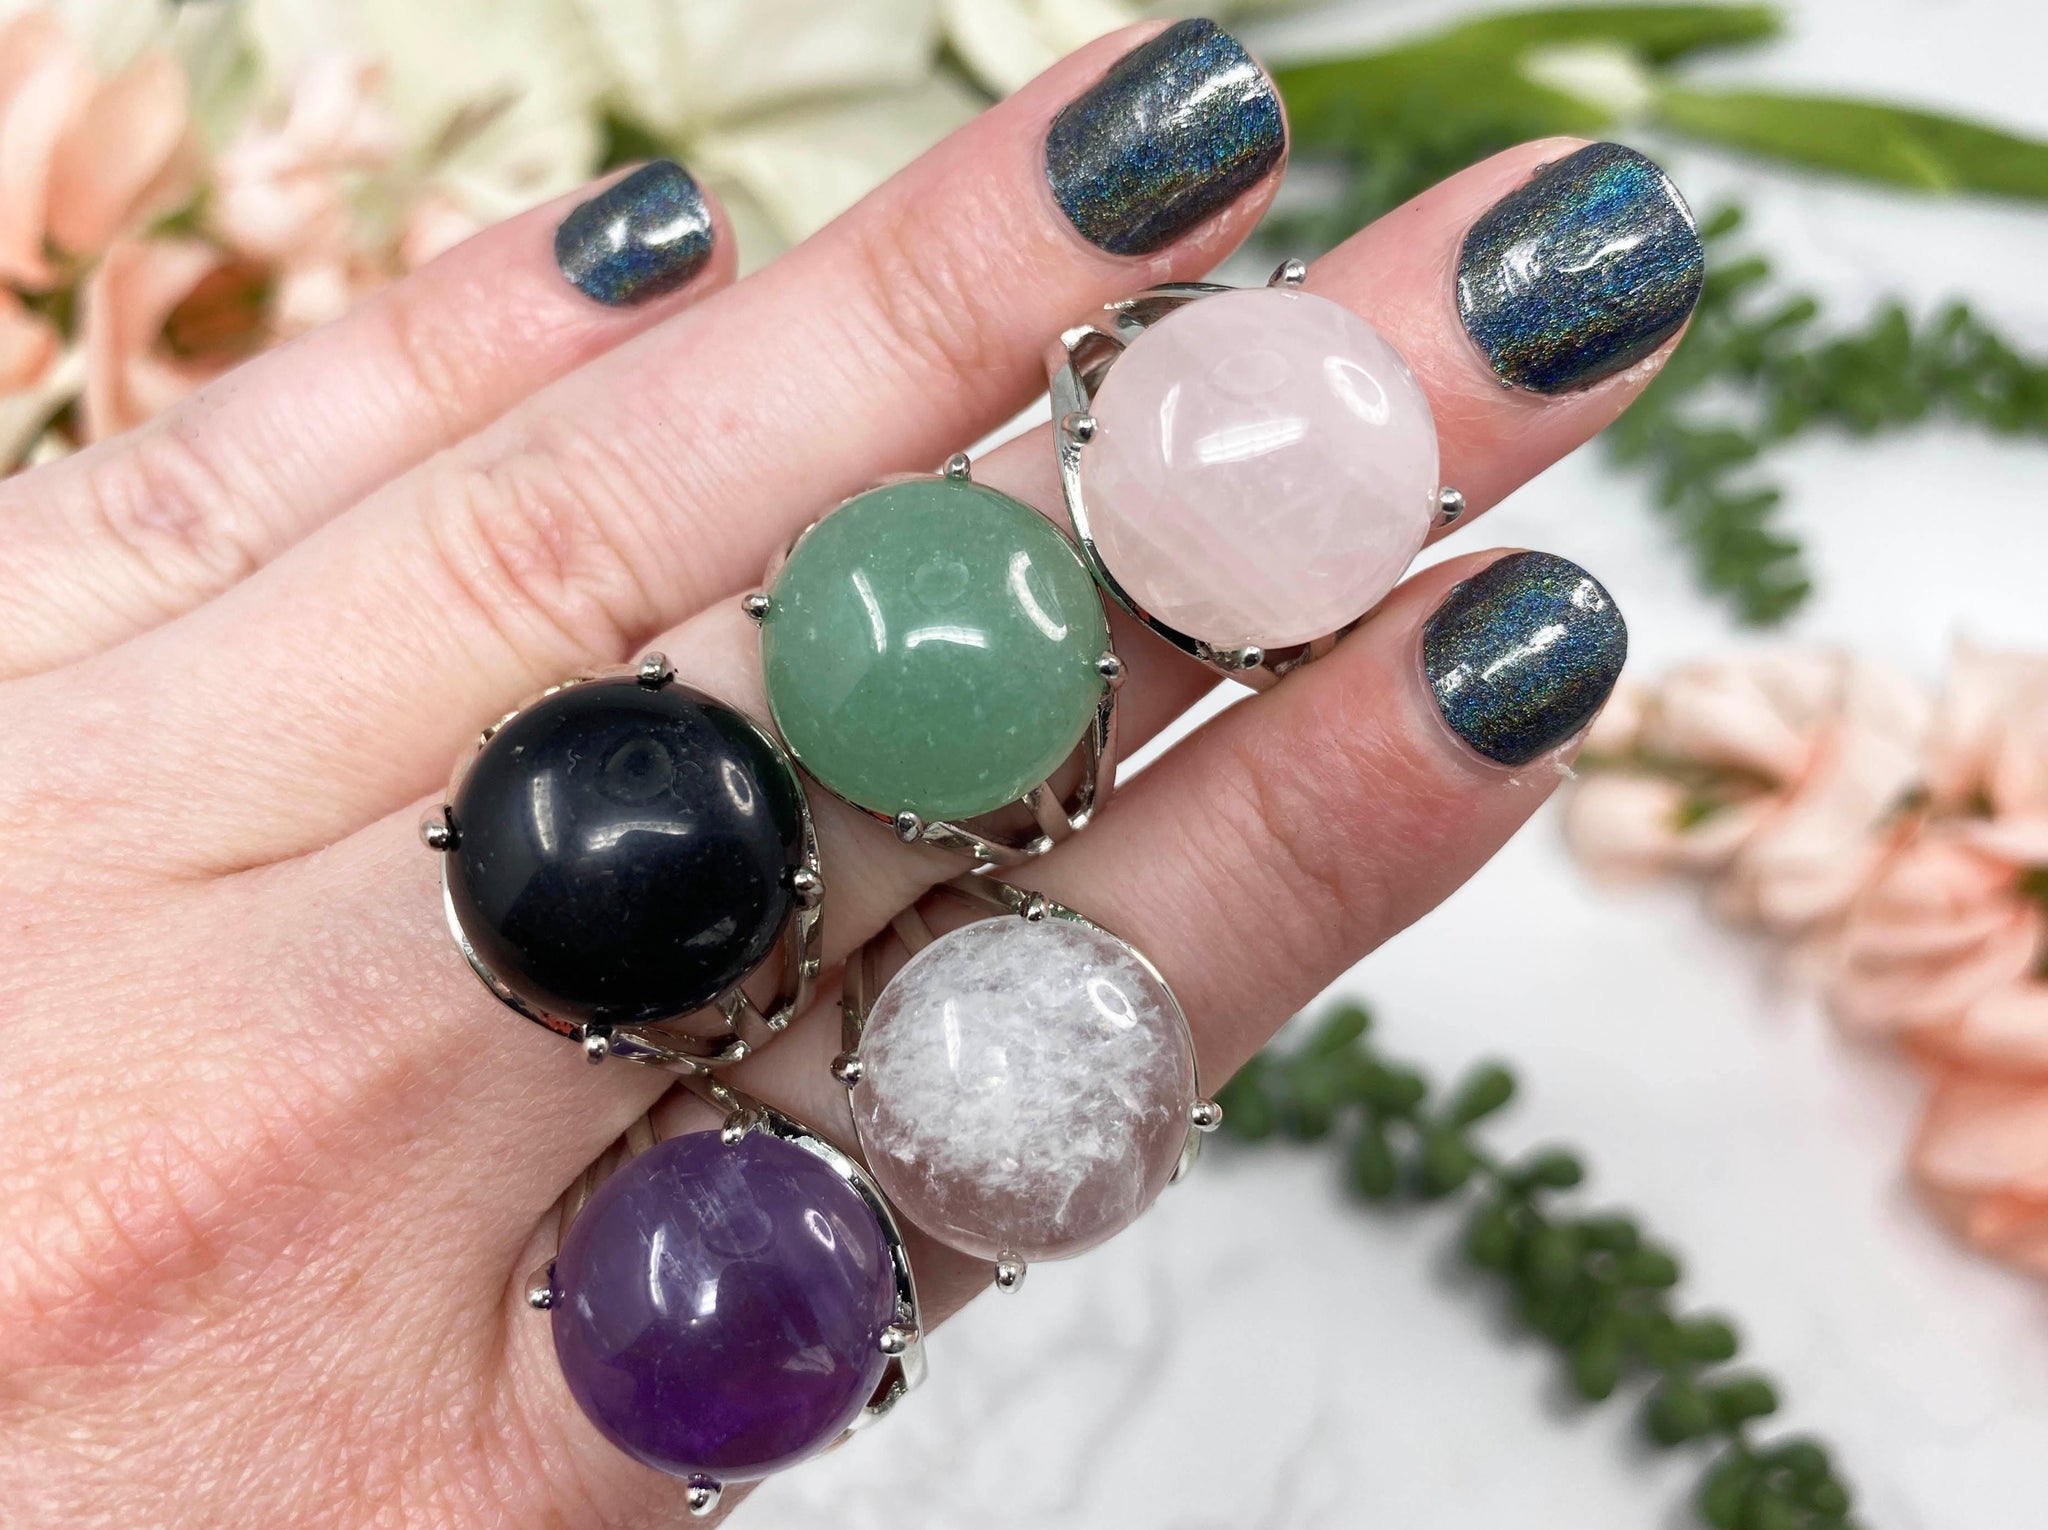 Adjustable Crystal Rings - 5 Different Stone Options